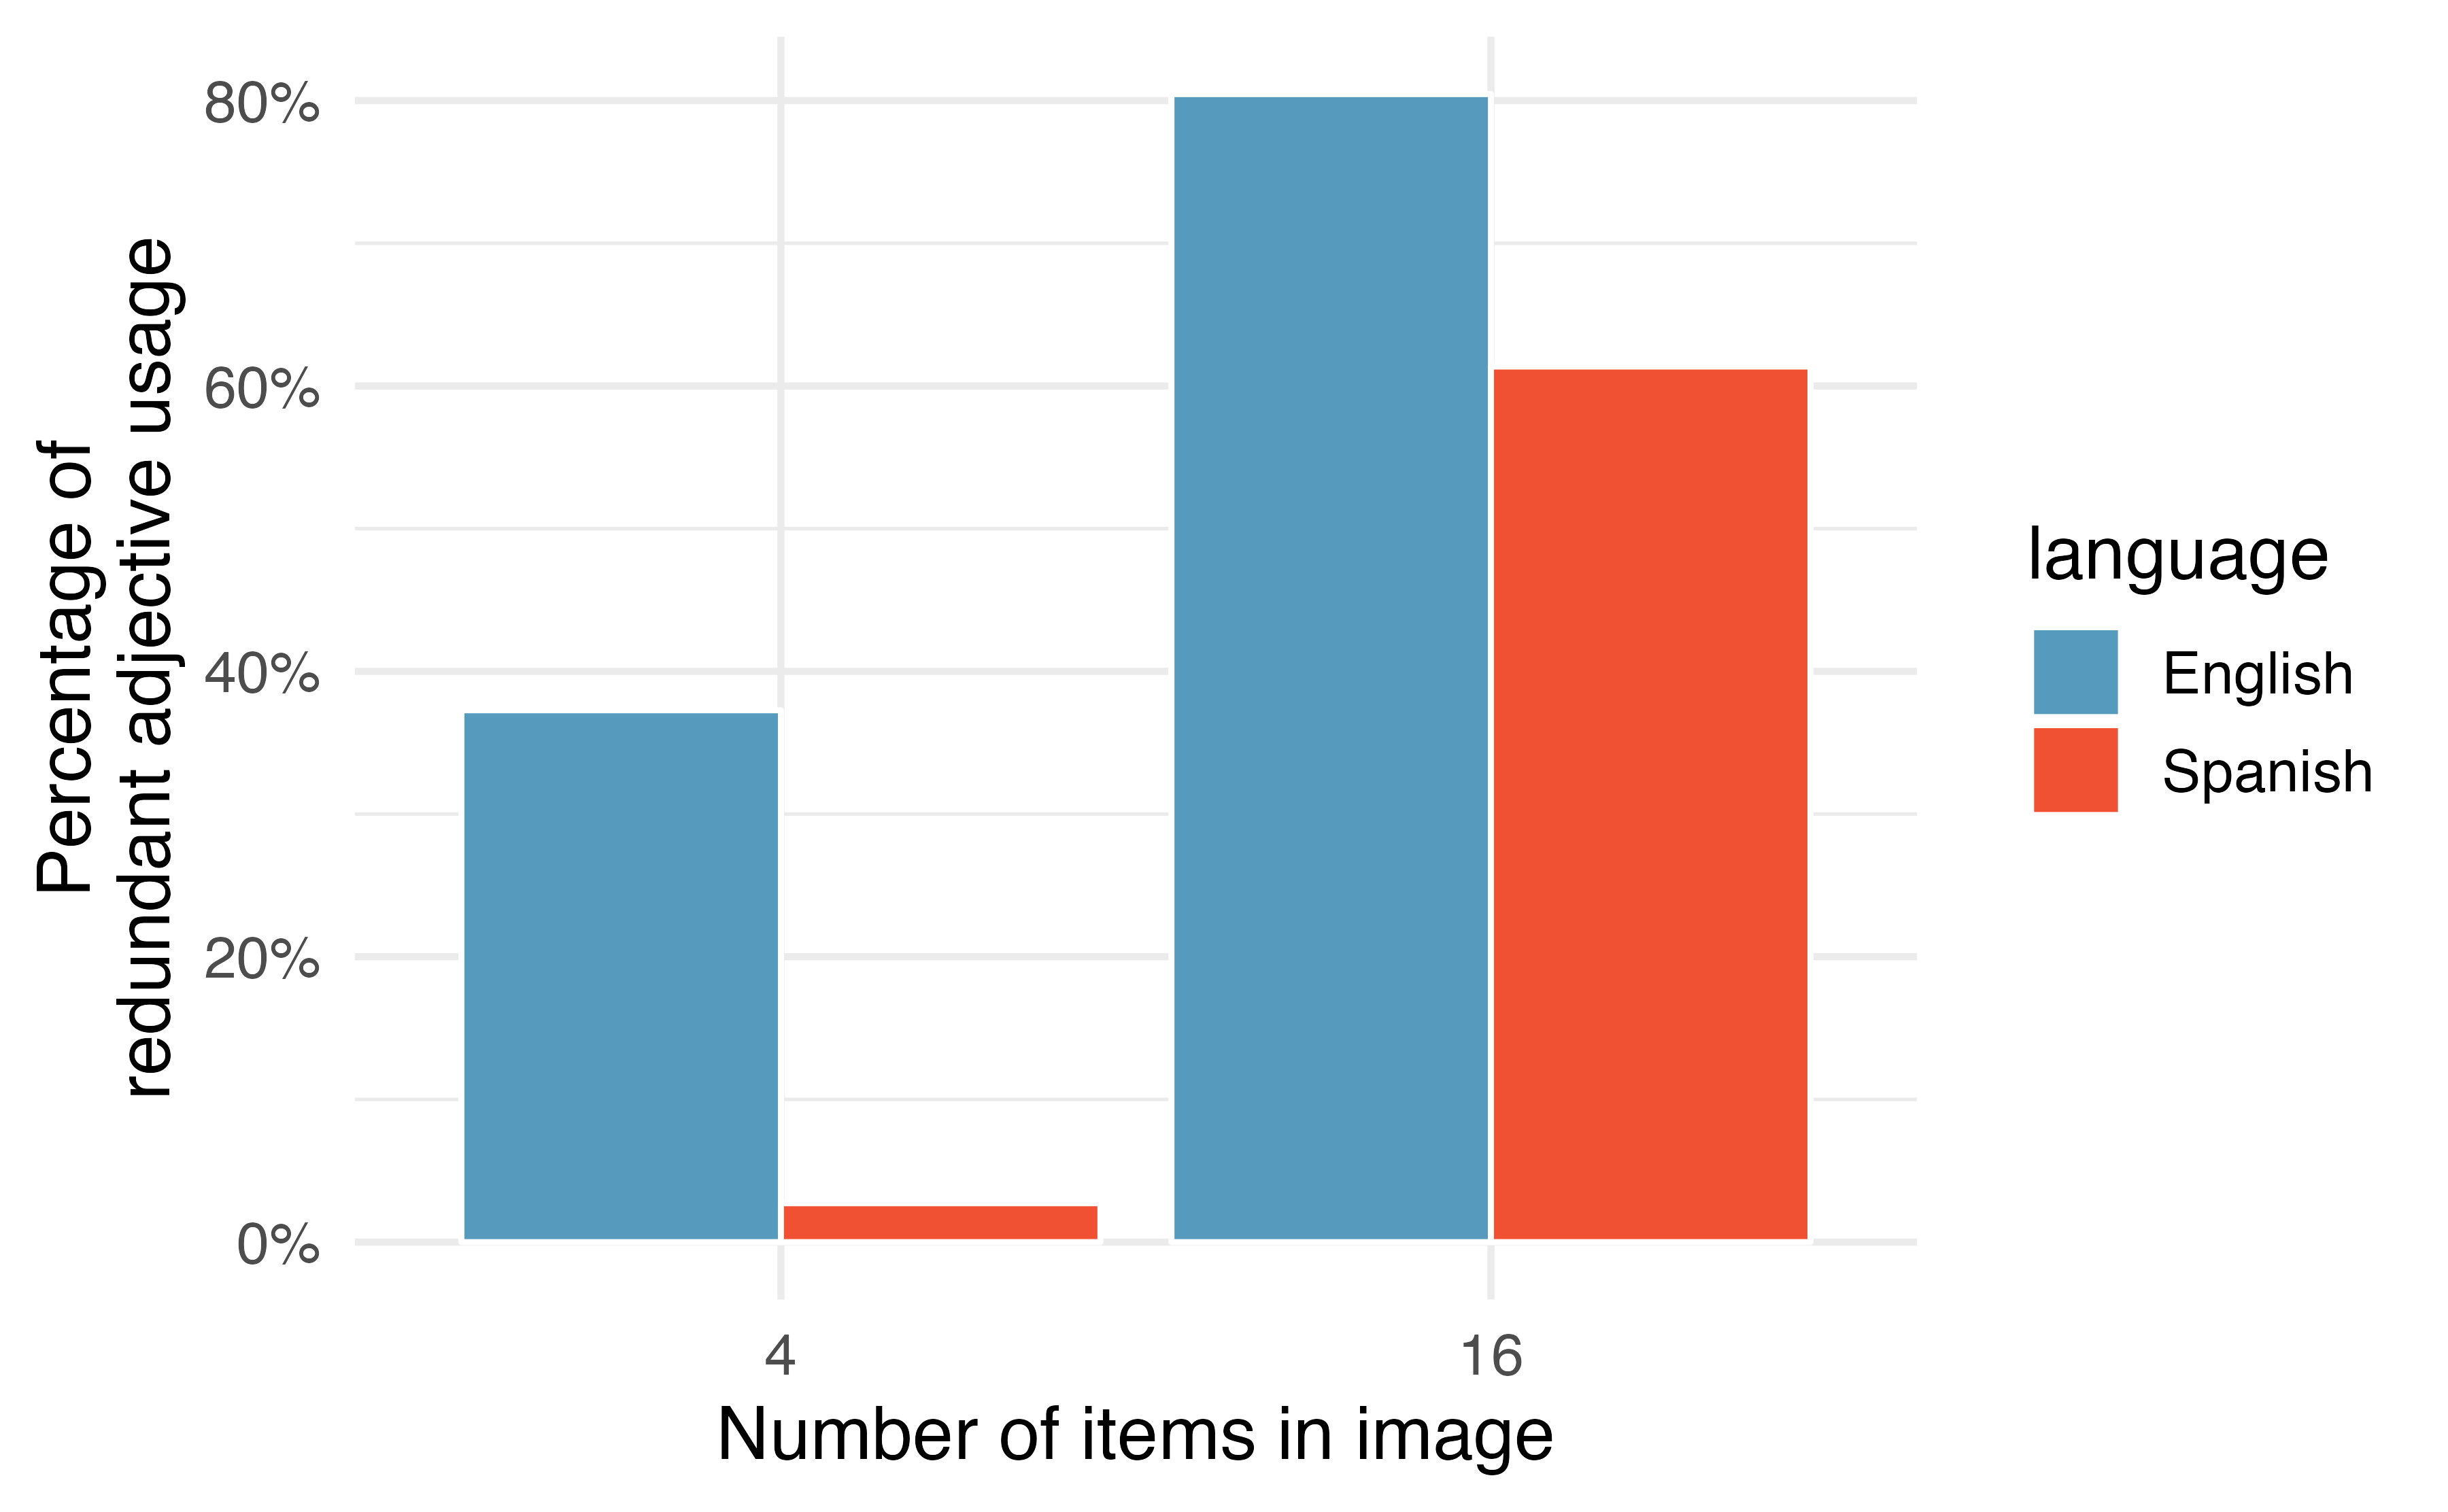 Results of redundant adjective usage experiment from @rubio-fernandez2021. English speakers are more likely than Spanish speakers to use redundant adjectives, regardless of number of items in image. For both images, respondents are more likely to use a redundant adjective when there are more items in the image.